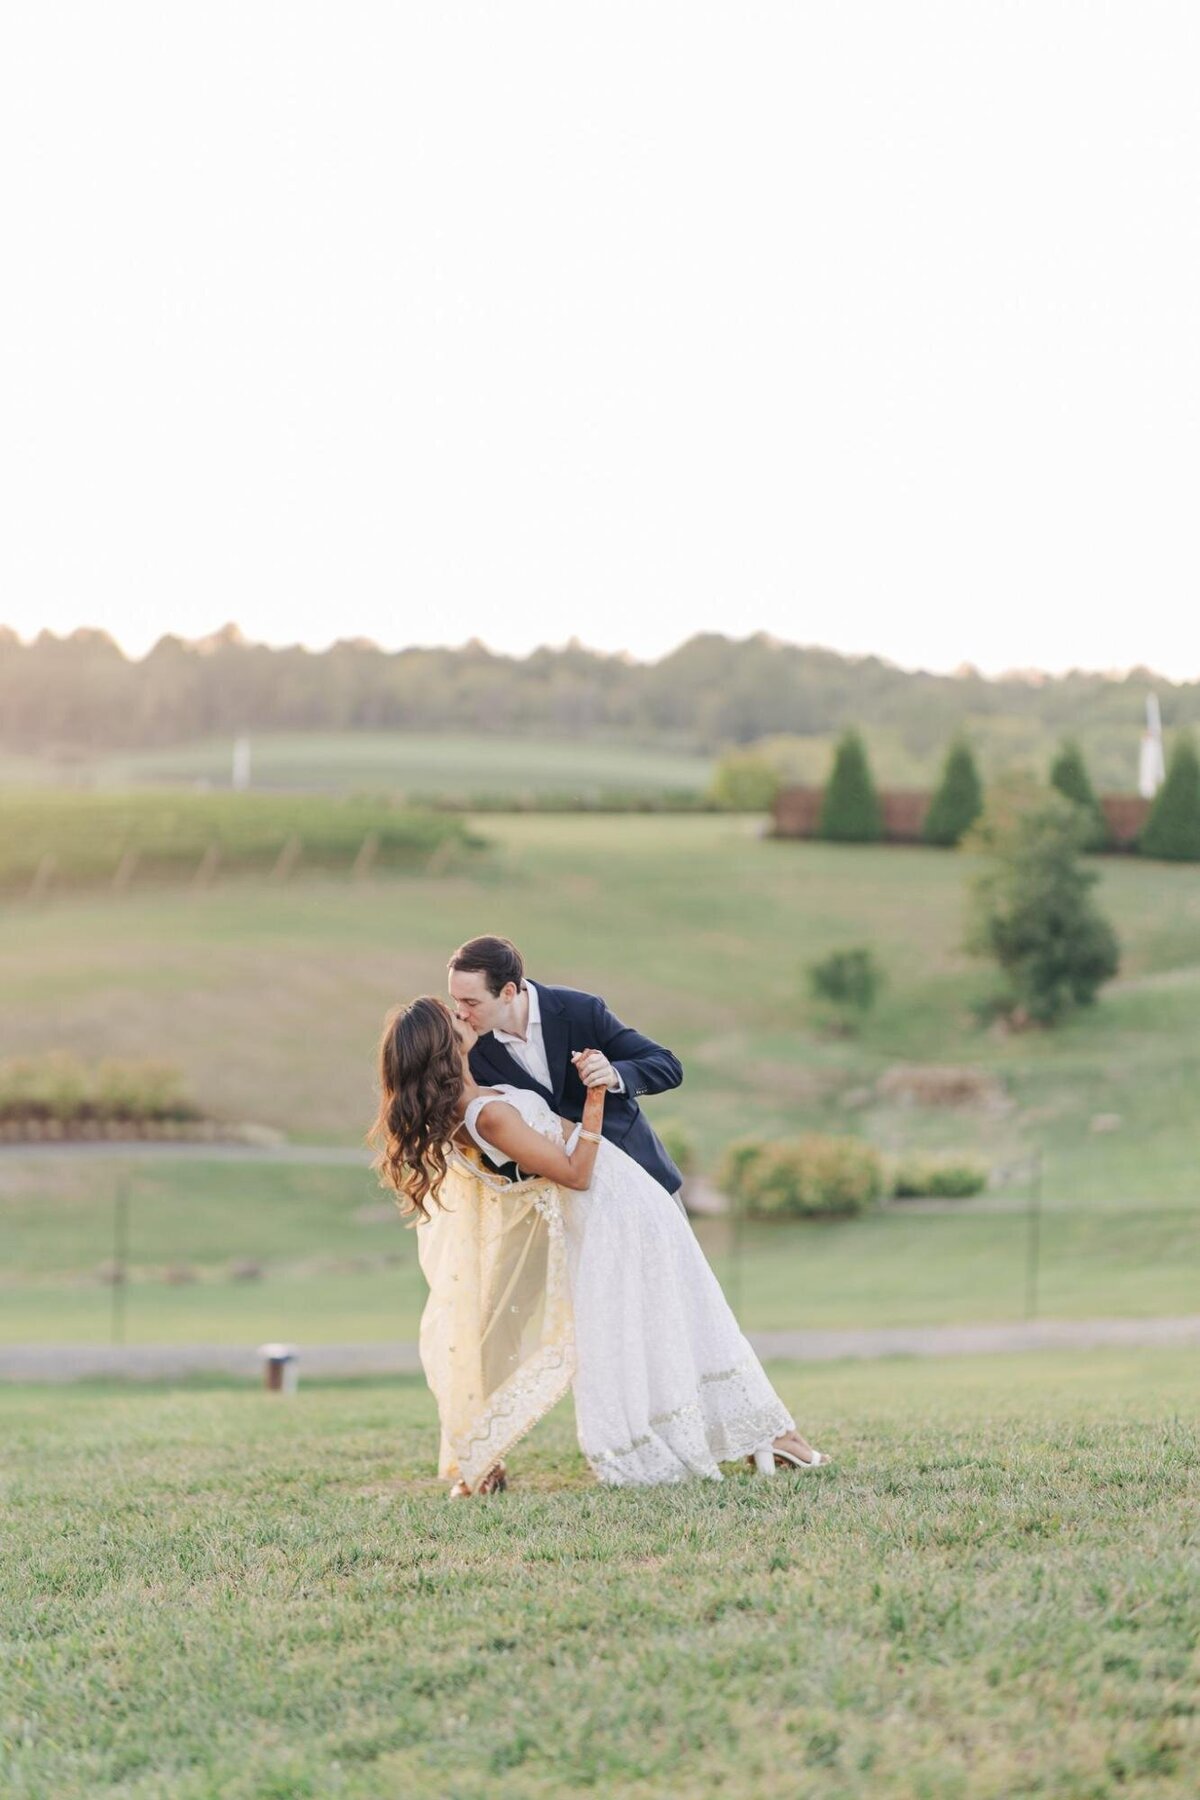 A couple in wedding attire kissing, with the groom dipping the bride in a grassy field, gentle hills in the background.